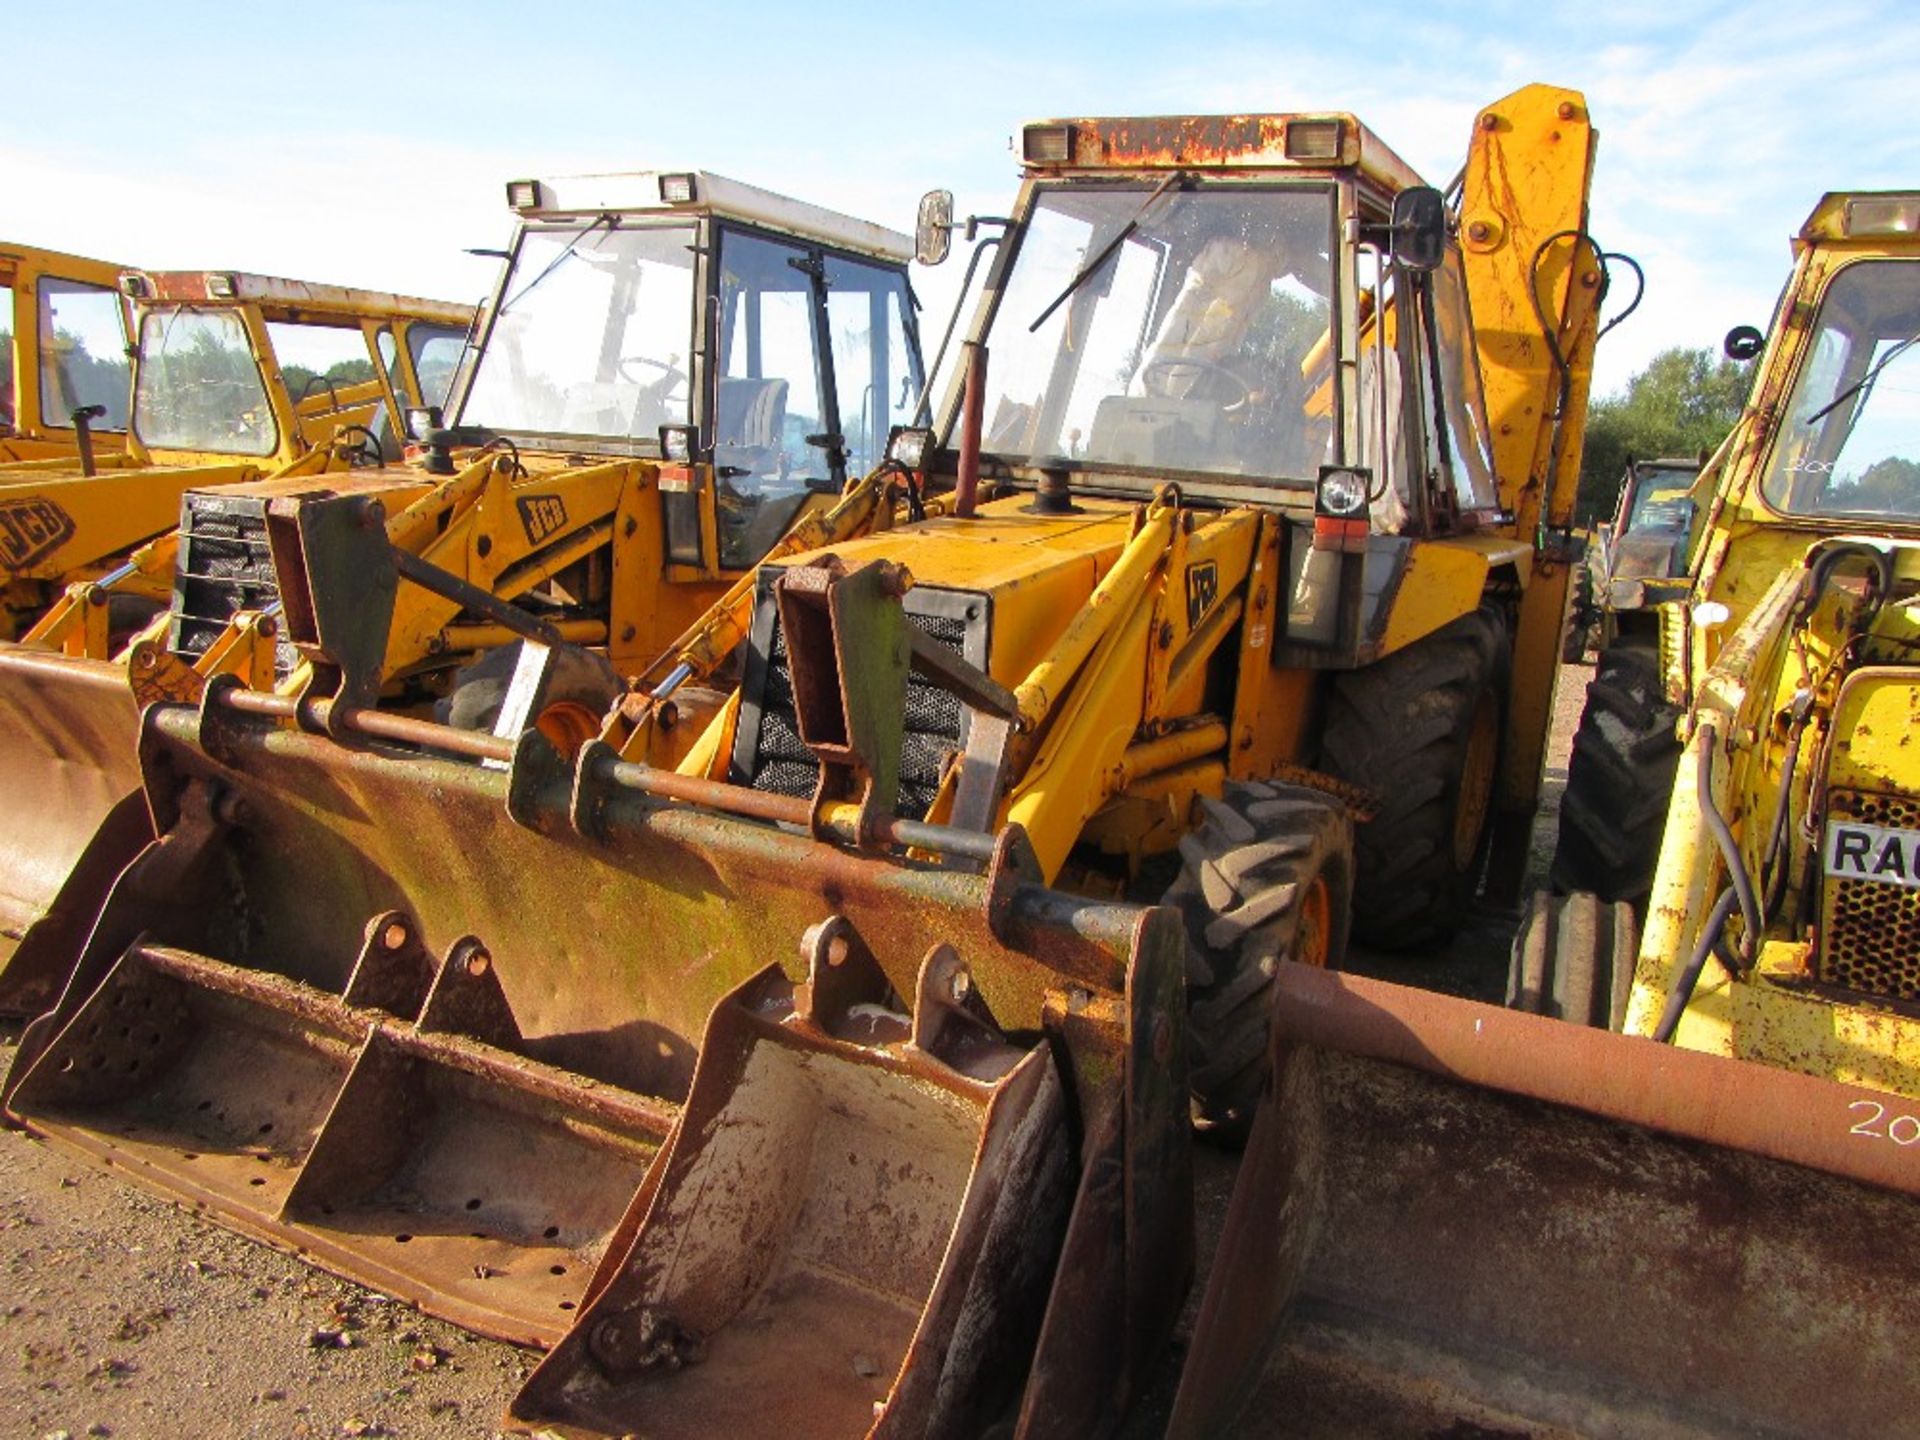 JCB 3CX Turbo Digger Loader with 5 Stud Rear Axle, 4 in 1 Extender, 3no. Buckets & Pallet Tines.